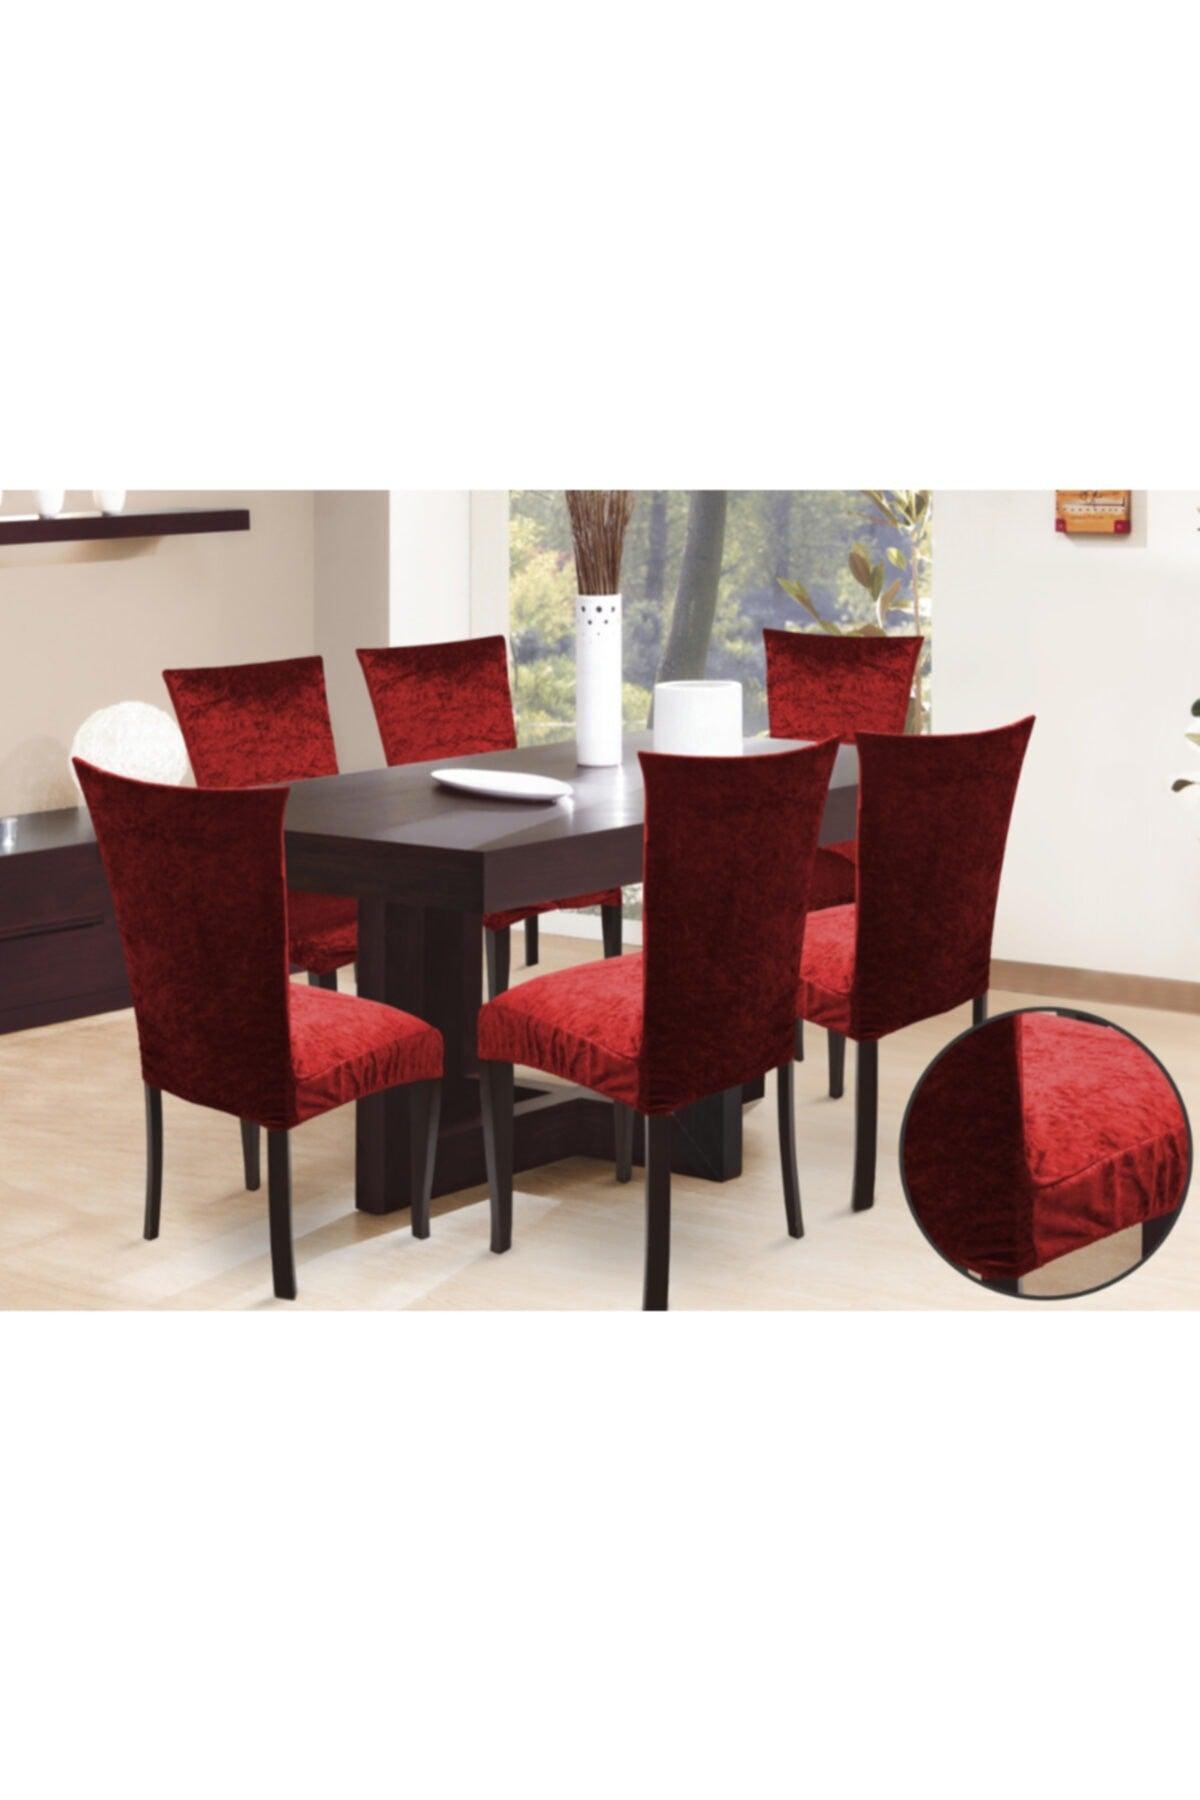 Velvet Chair Cover Cover -Red 6 Pieces - Swordslife